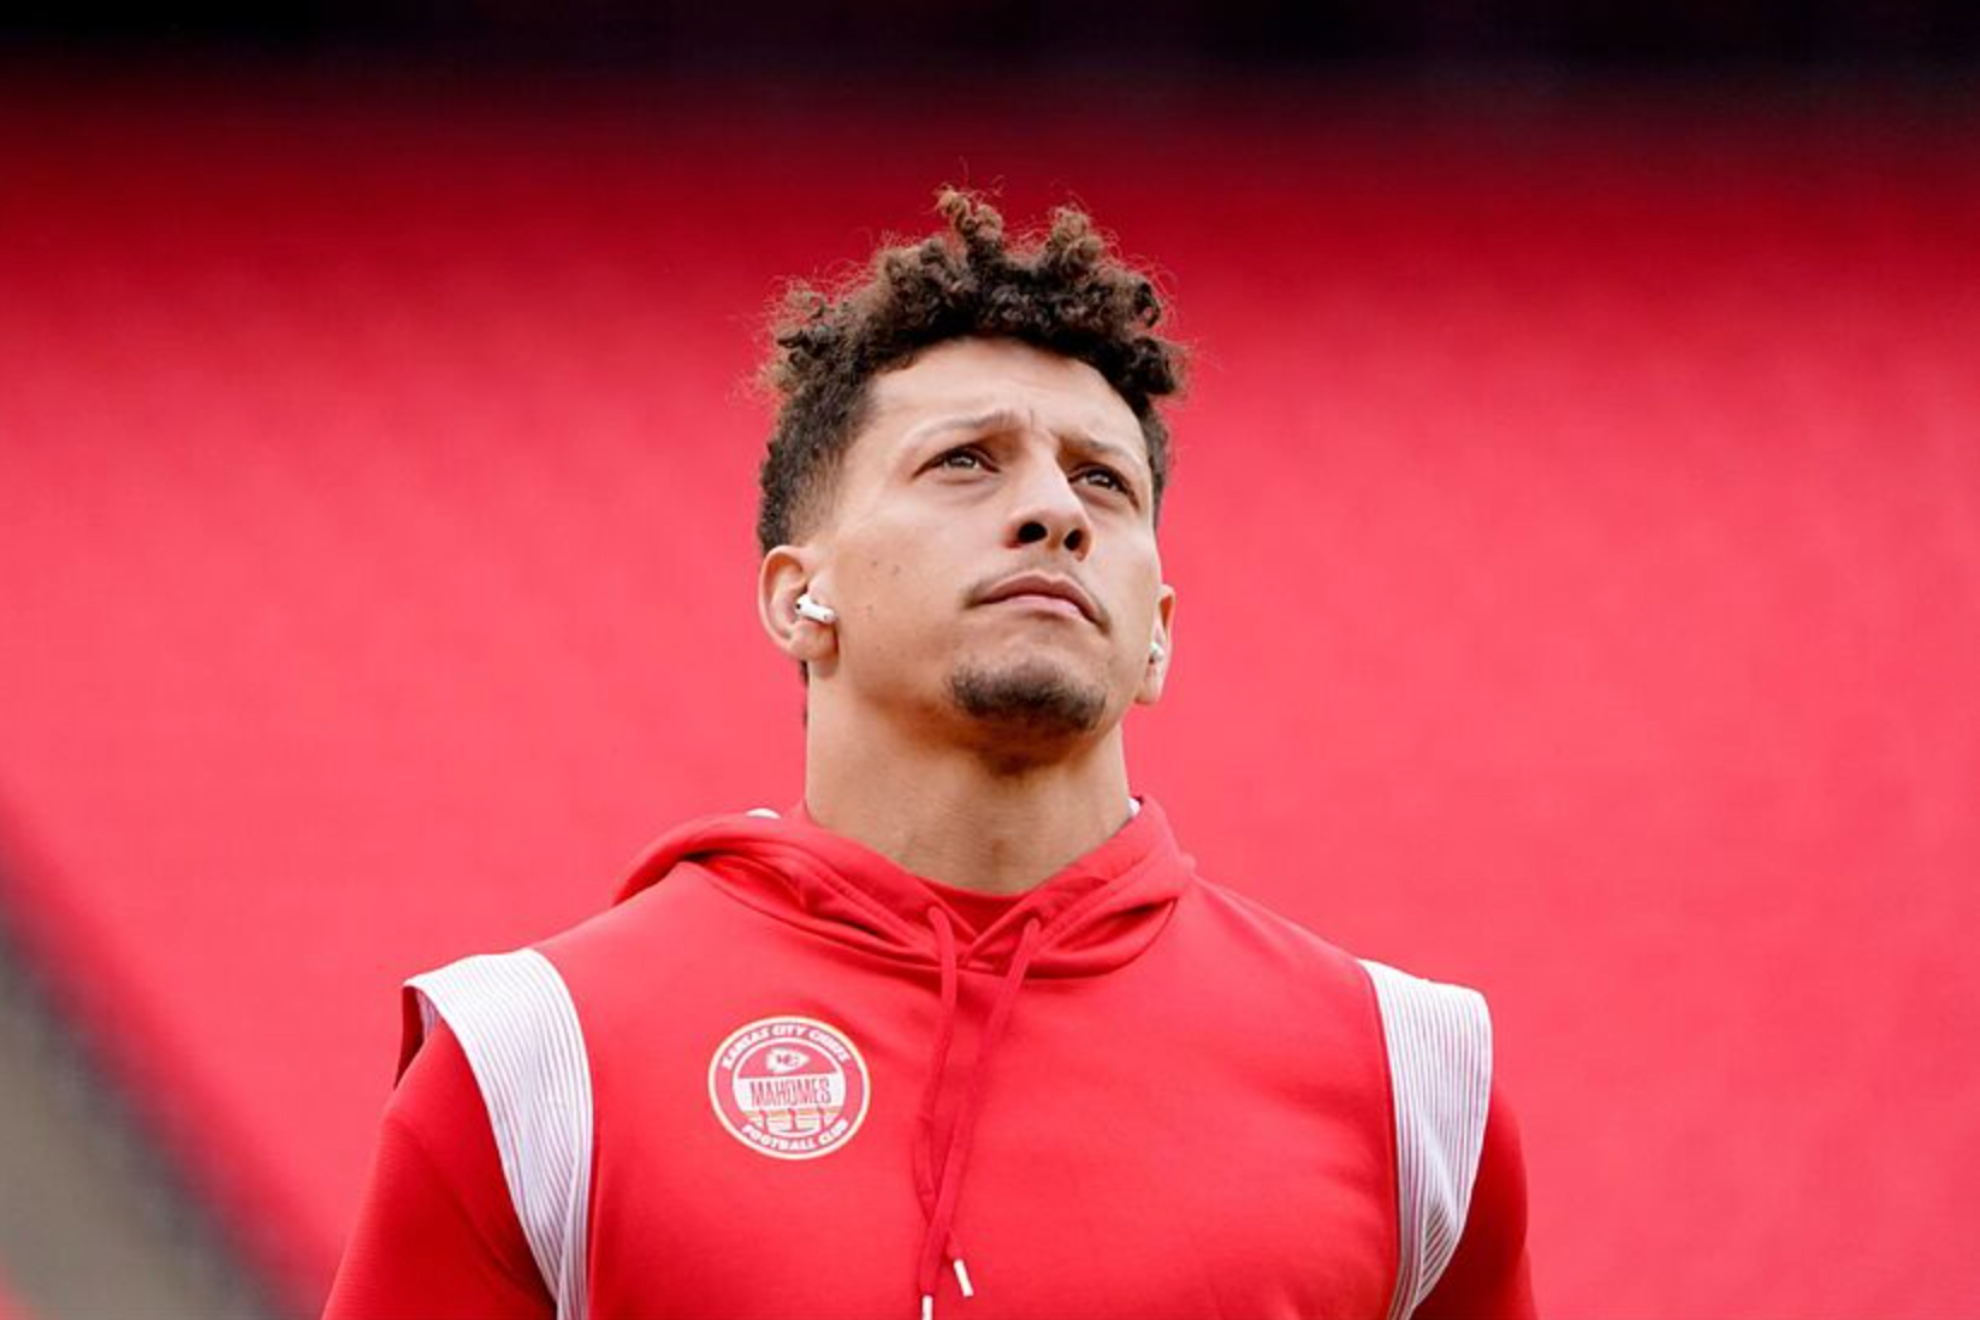 Patrick Mahomes explains how he decided to buy two Rolls-Royce models